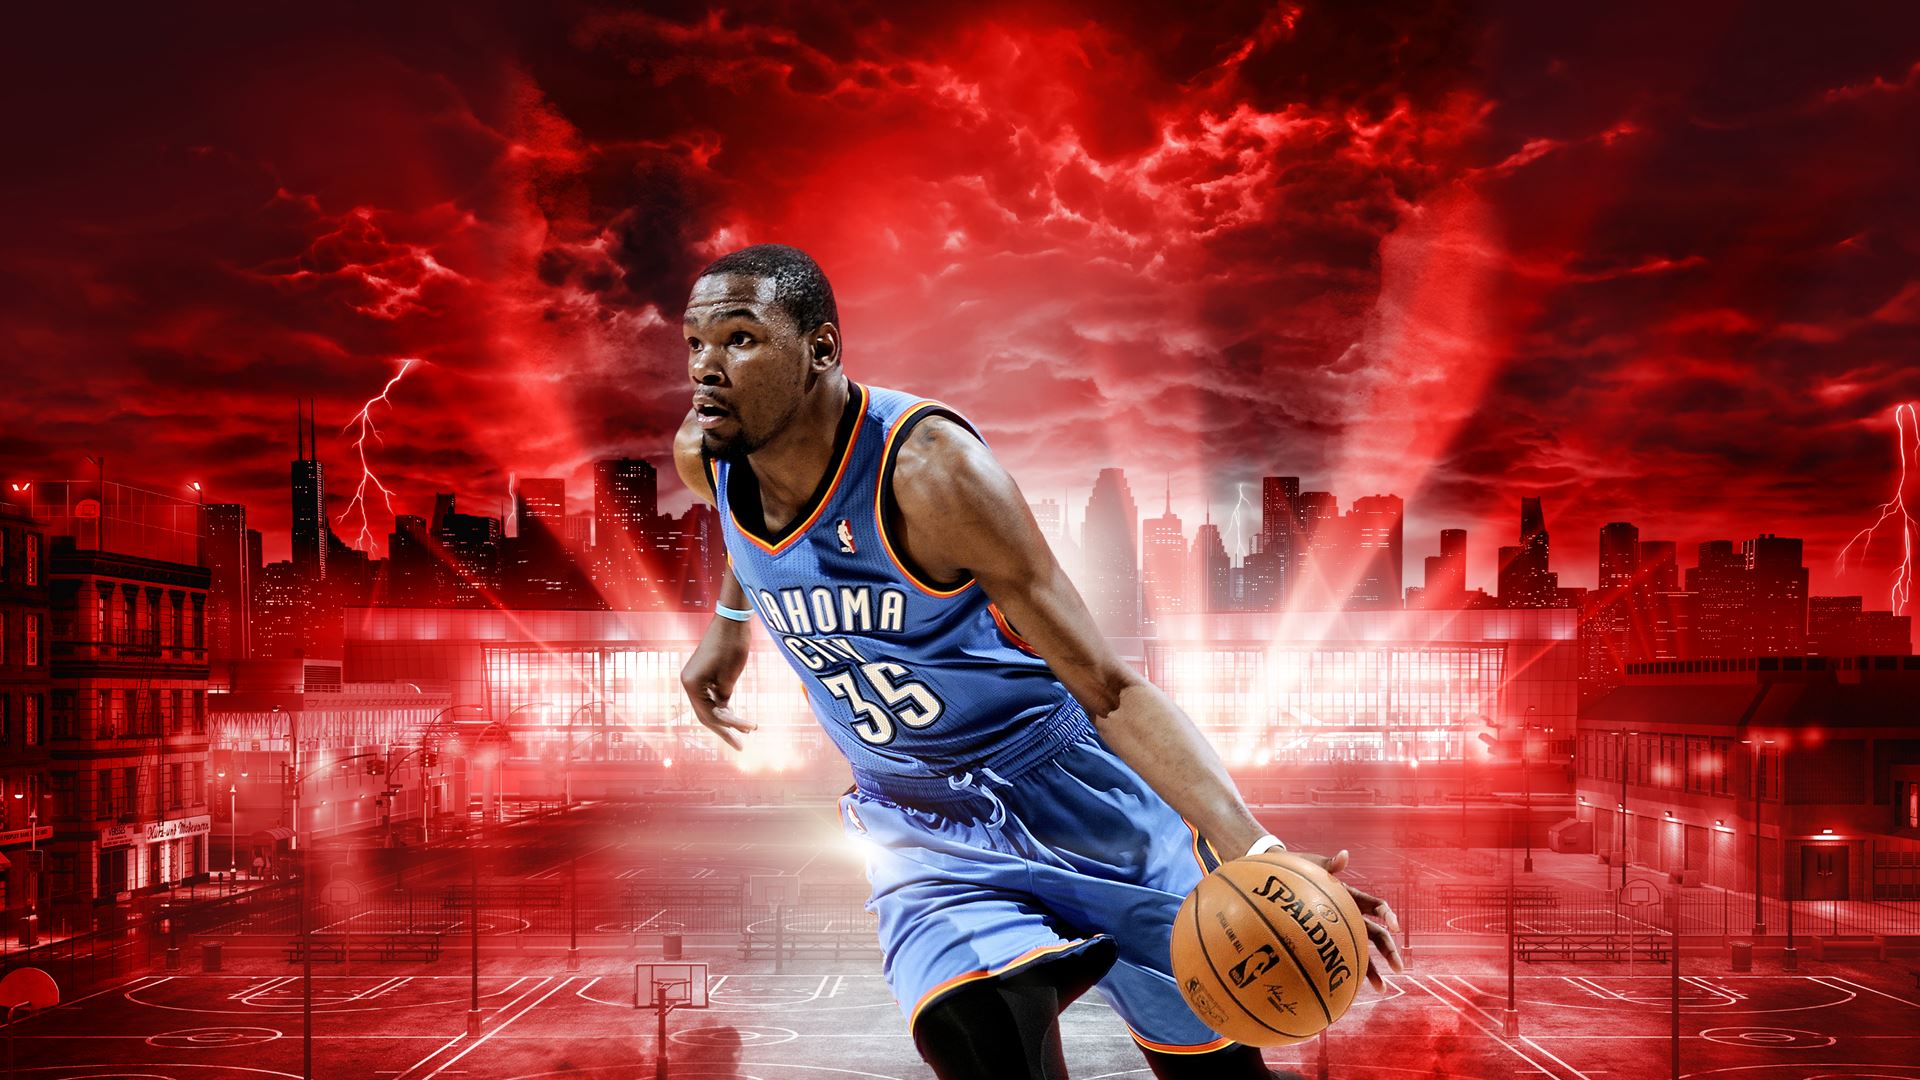 Top Nba 2k Cover Wallpaper For Your